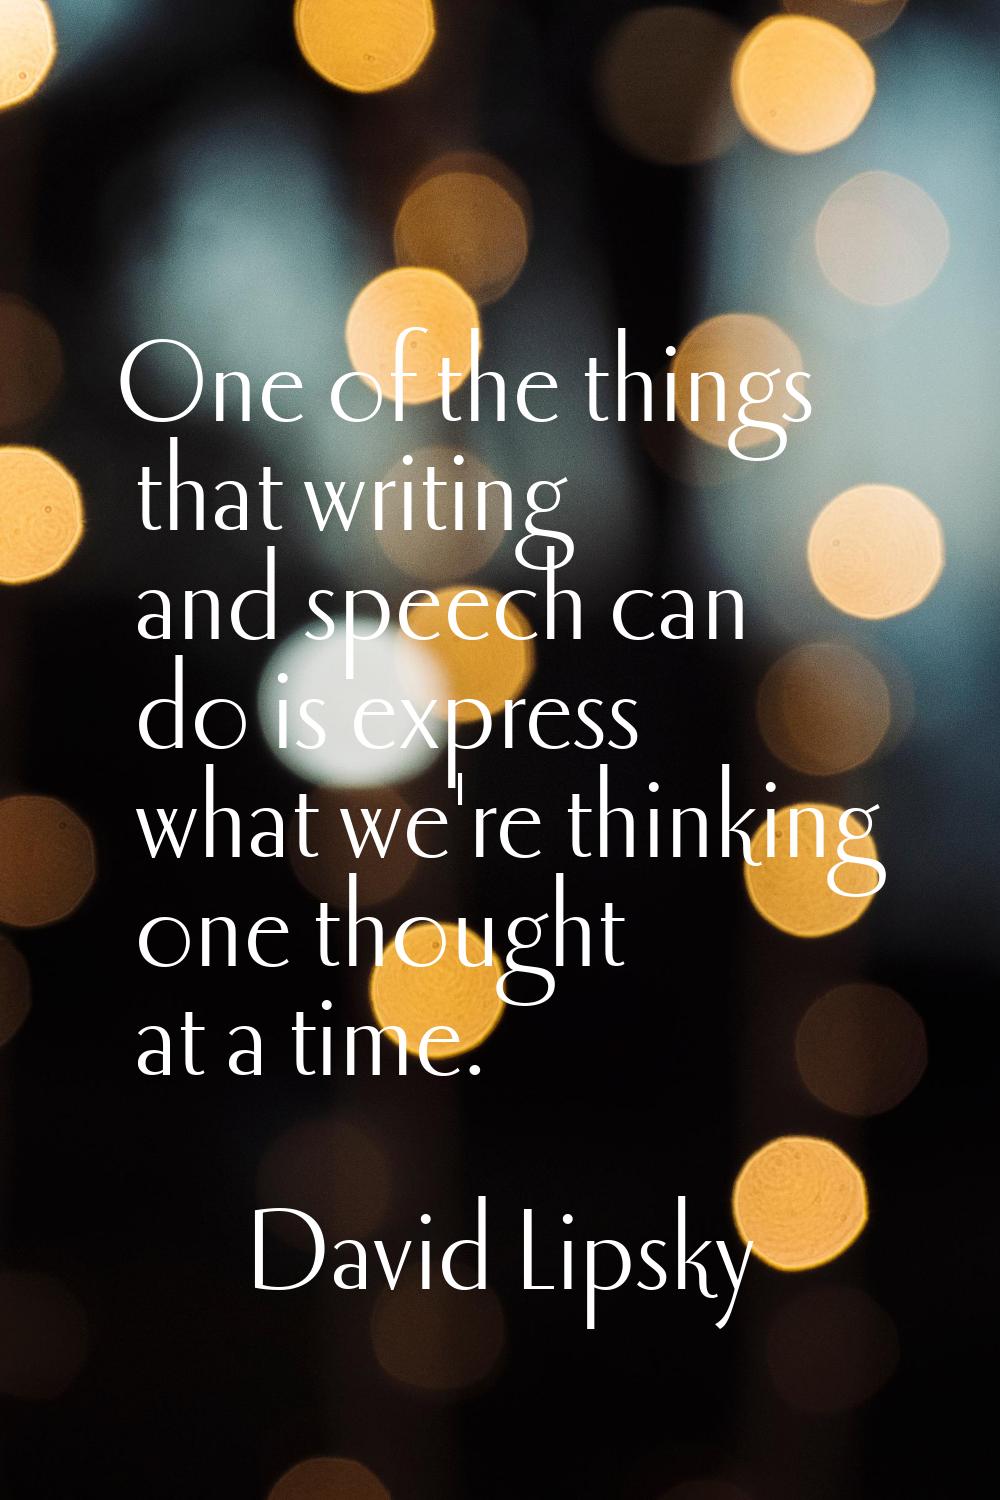 One of the things that writing and speech can do is express what we're thinking one thought at a ti